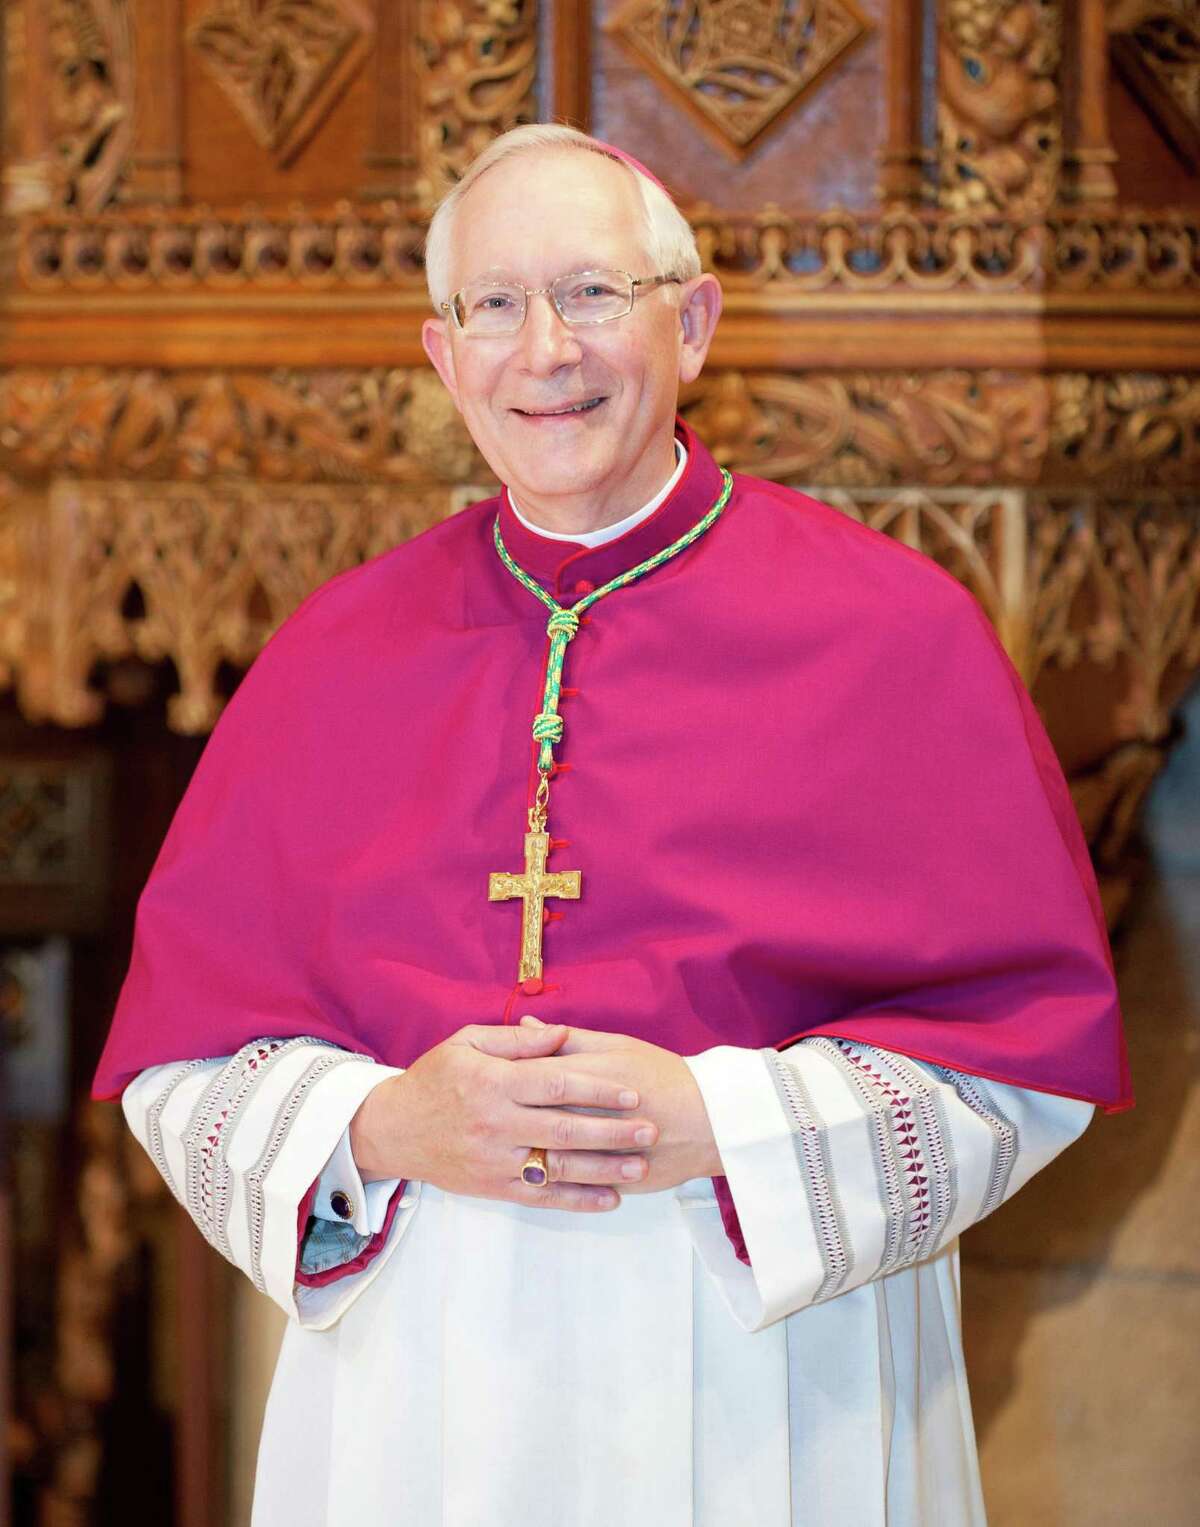 The Archdiocese of Hartford, led by Archbishop Leonard P. Blair (pictured here), said $50.6 million has been paid to settle more than 140 sex abuse claims against priests since 1953.